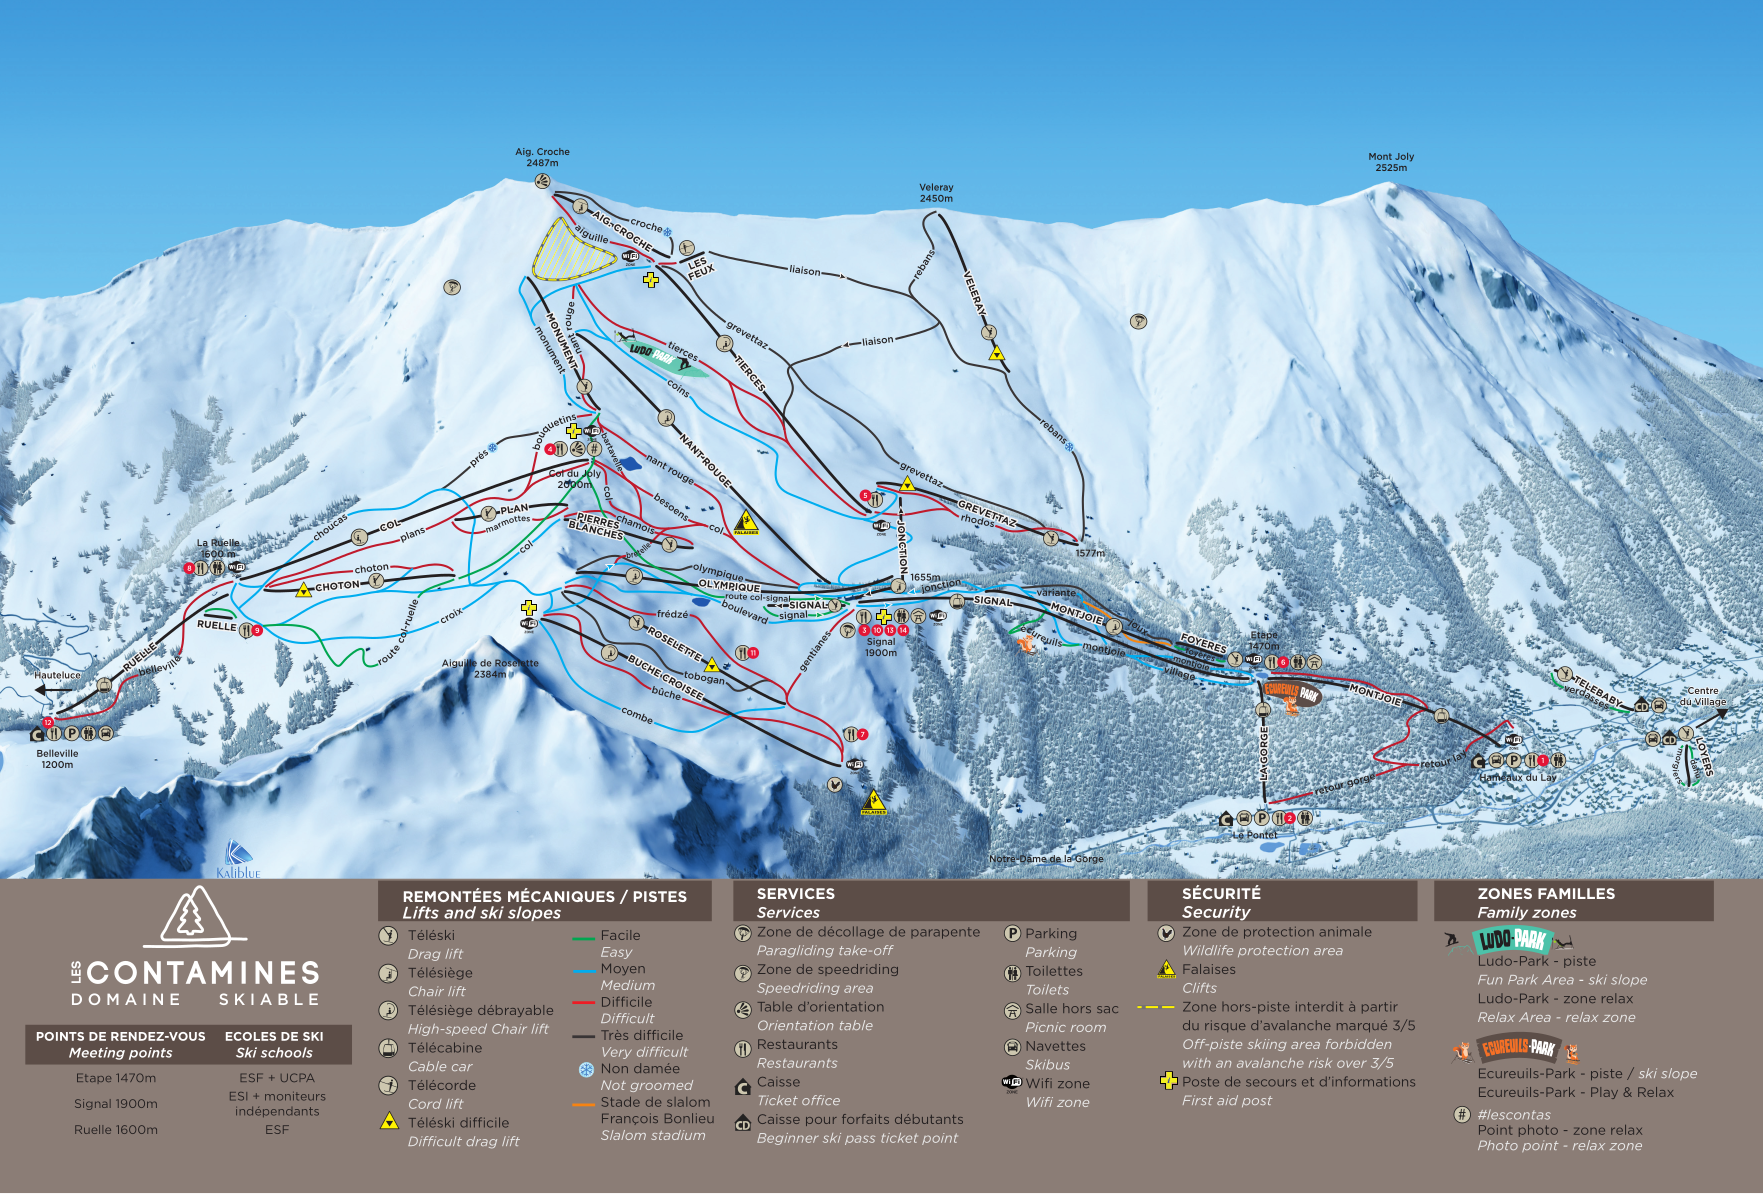 Discover the pistes map